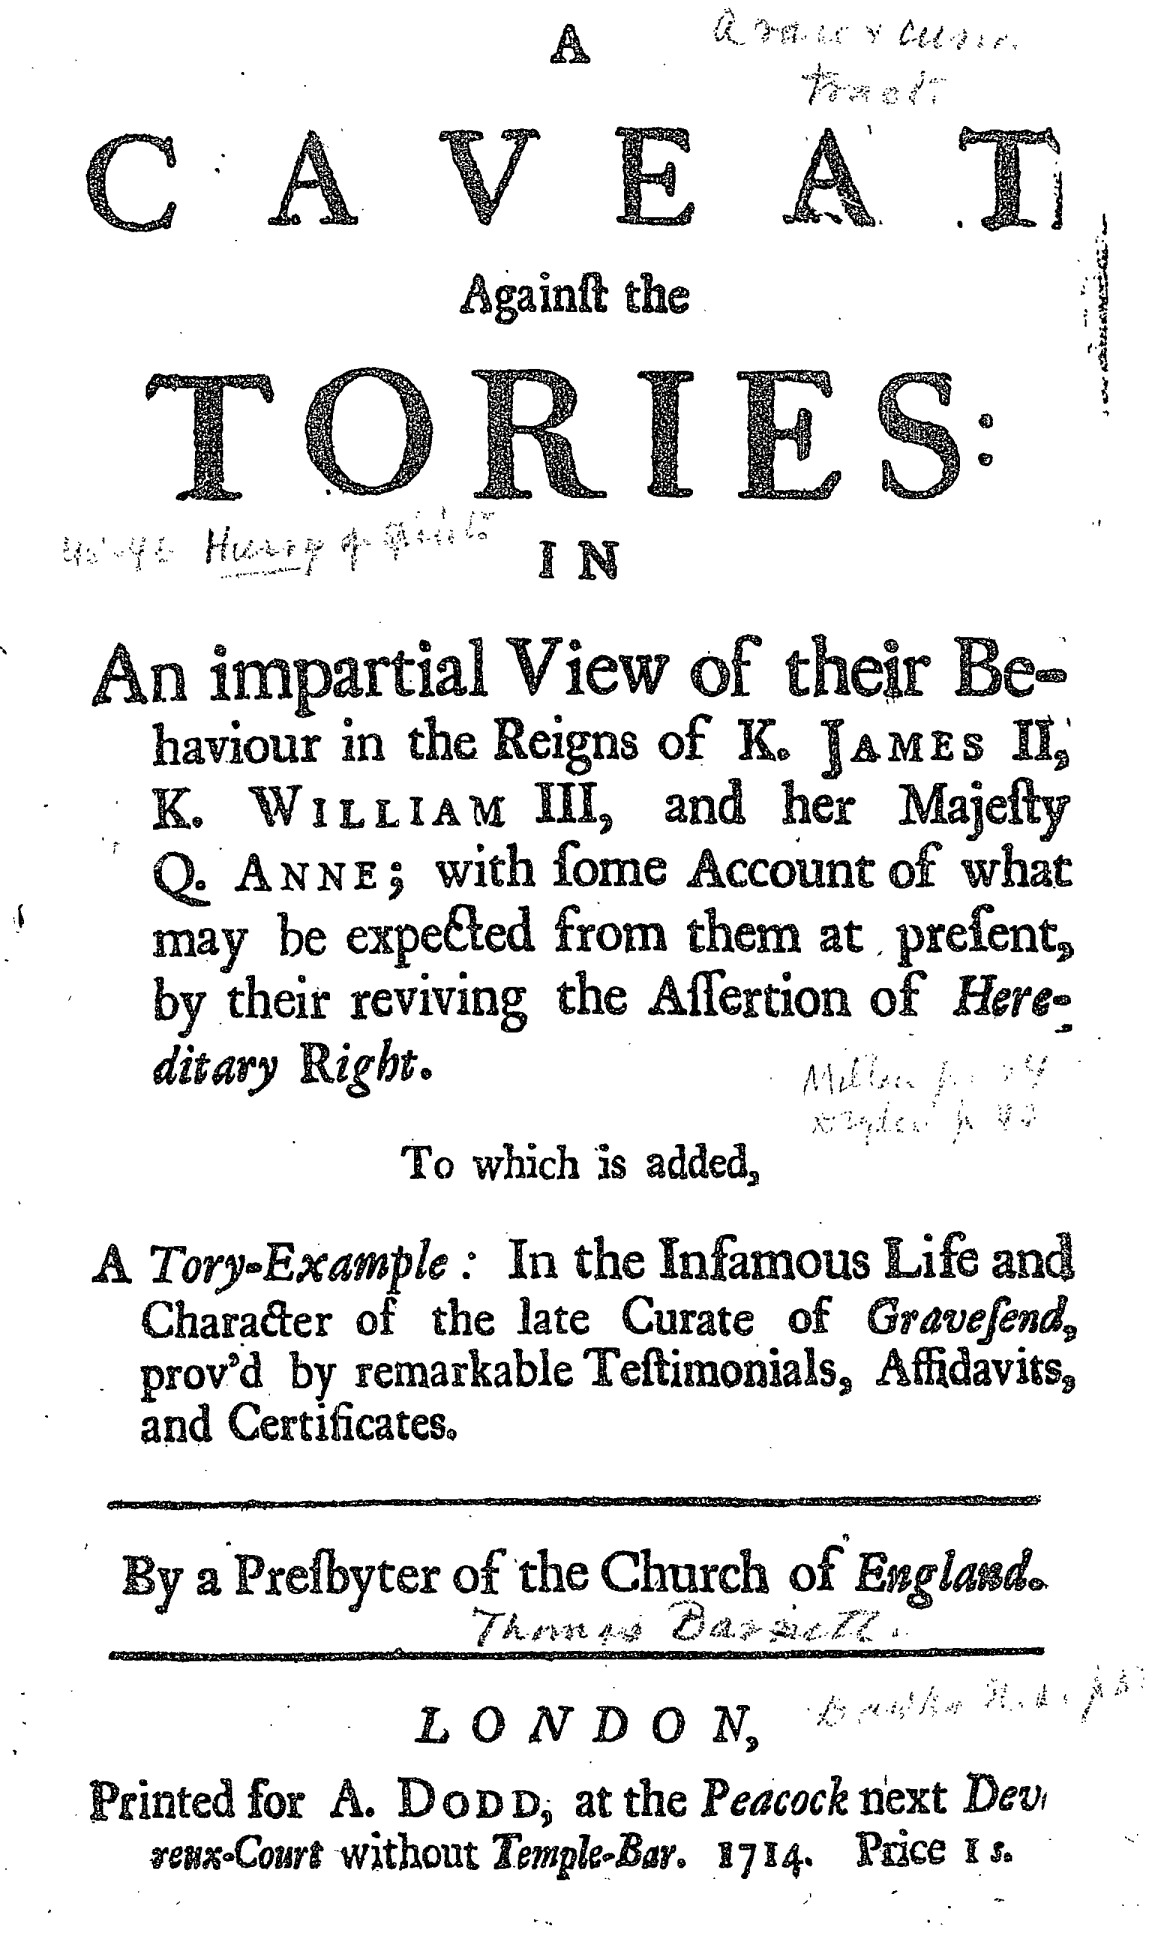 An image of "A Caveat Against the Tories" from 1714. The imprint reads: "Printed for A. Dodd, at the Peacock next Devreux-Court without Temple-Bar"